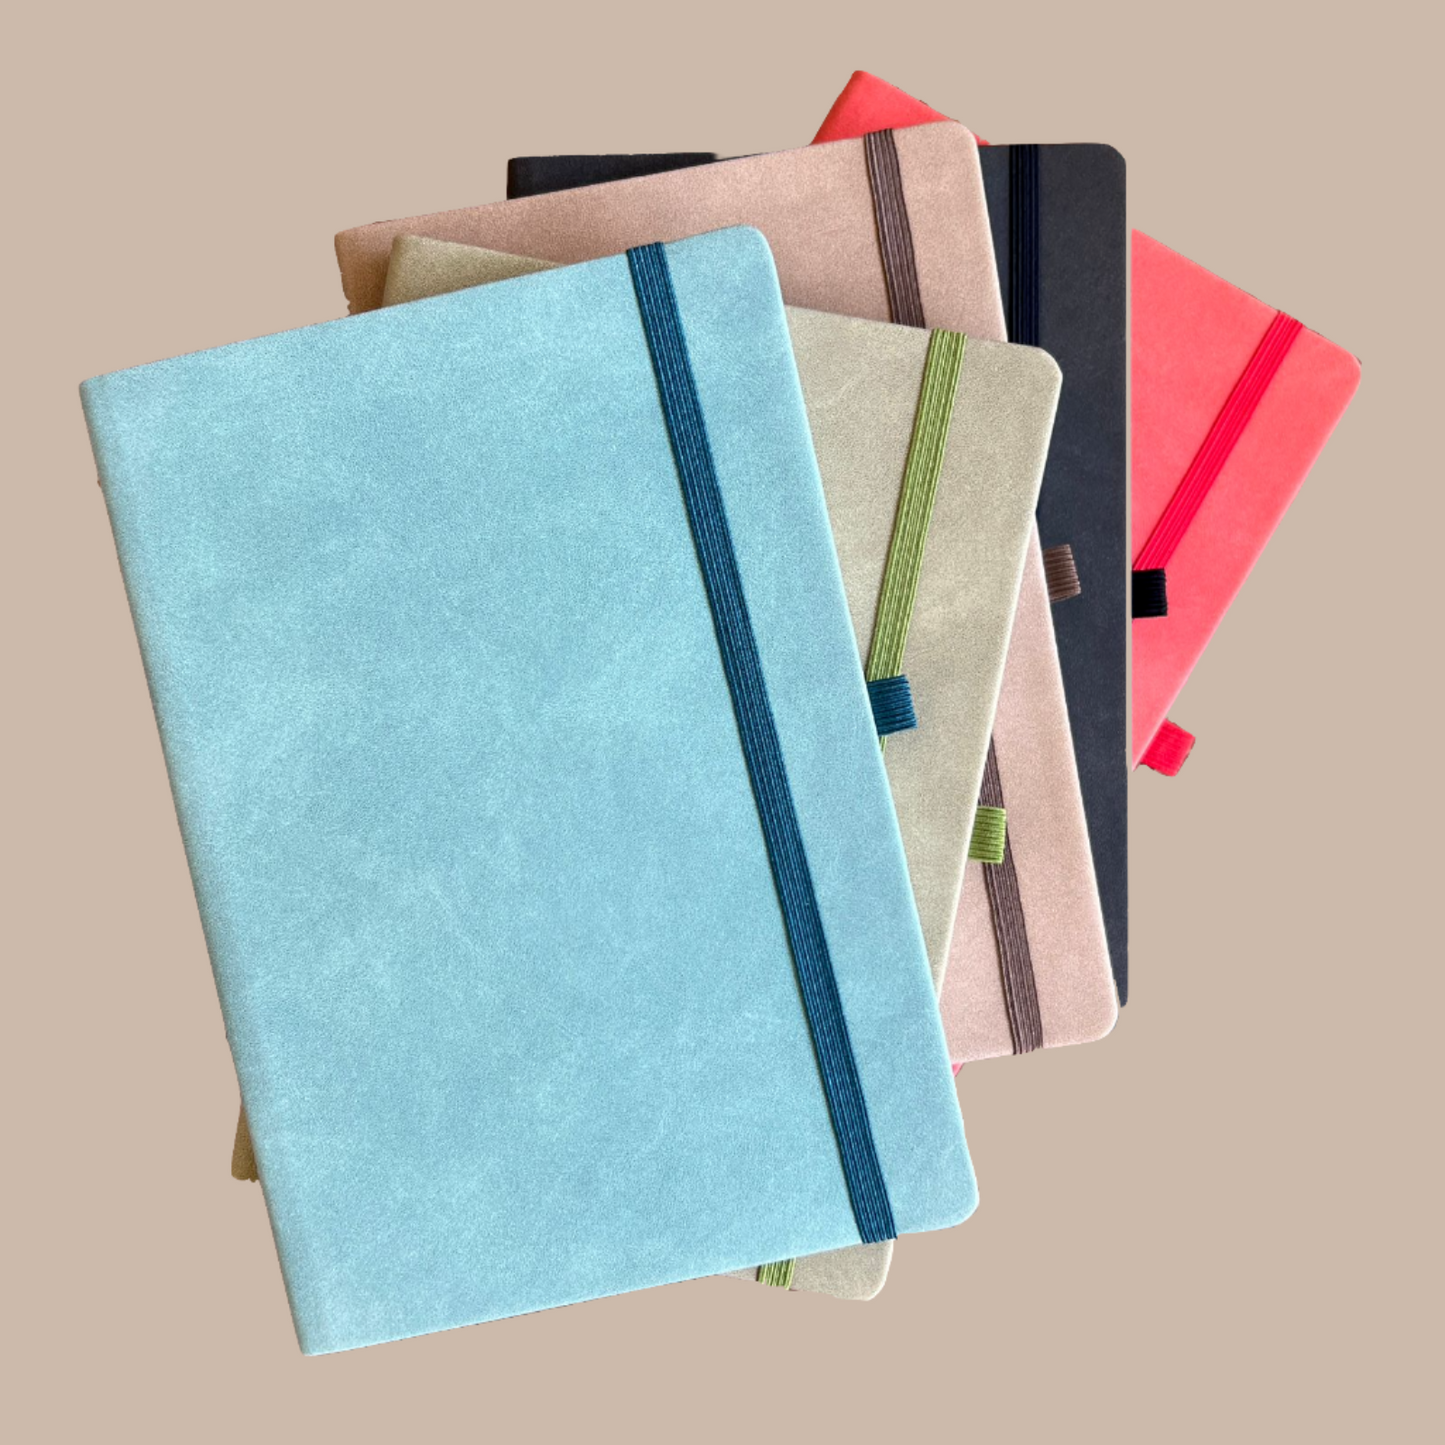 Vegan Suede Teal with Elastic Band Notebook